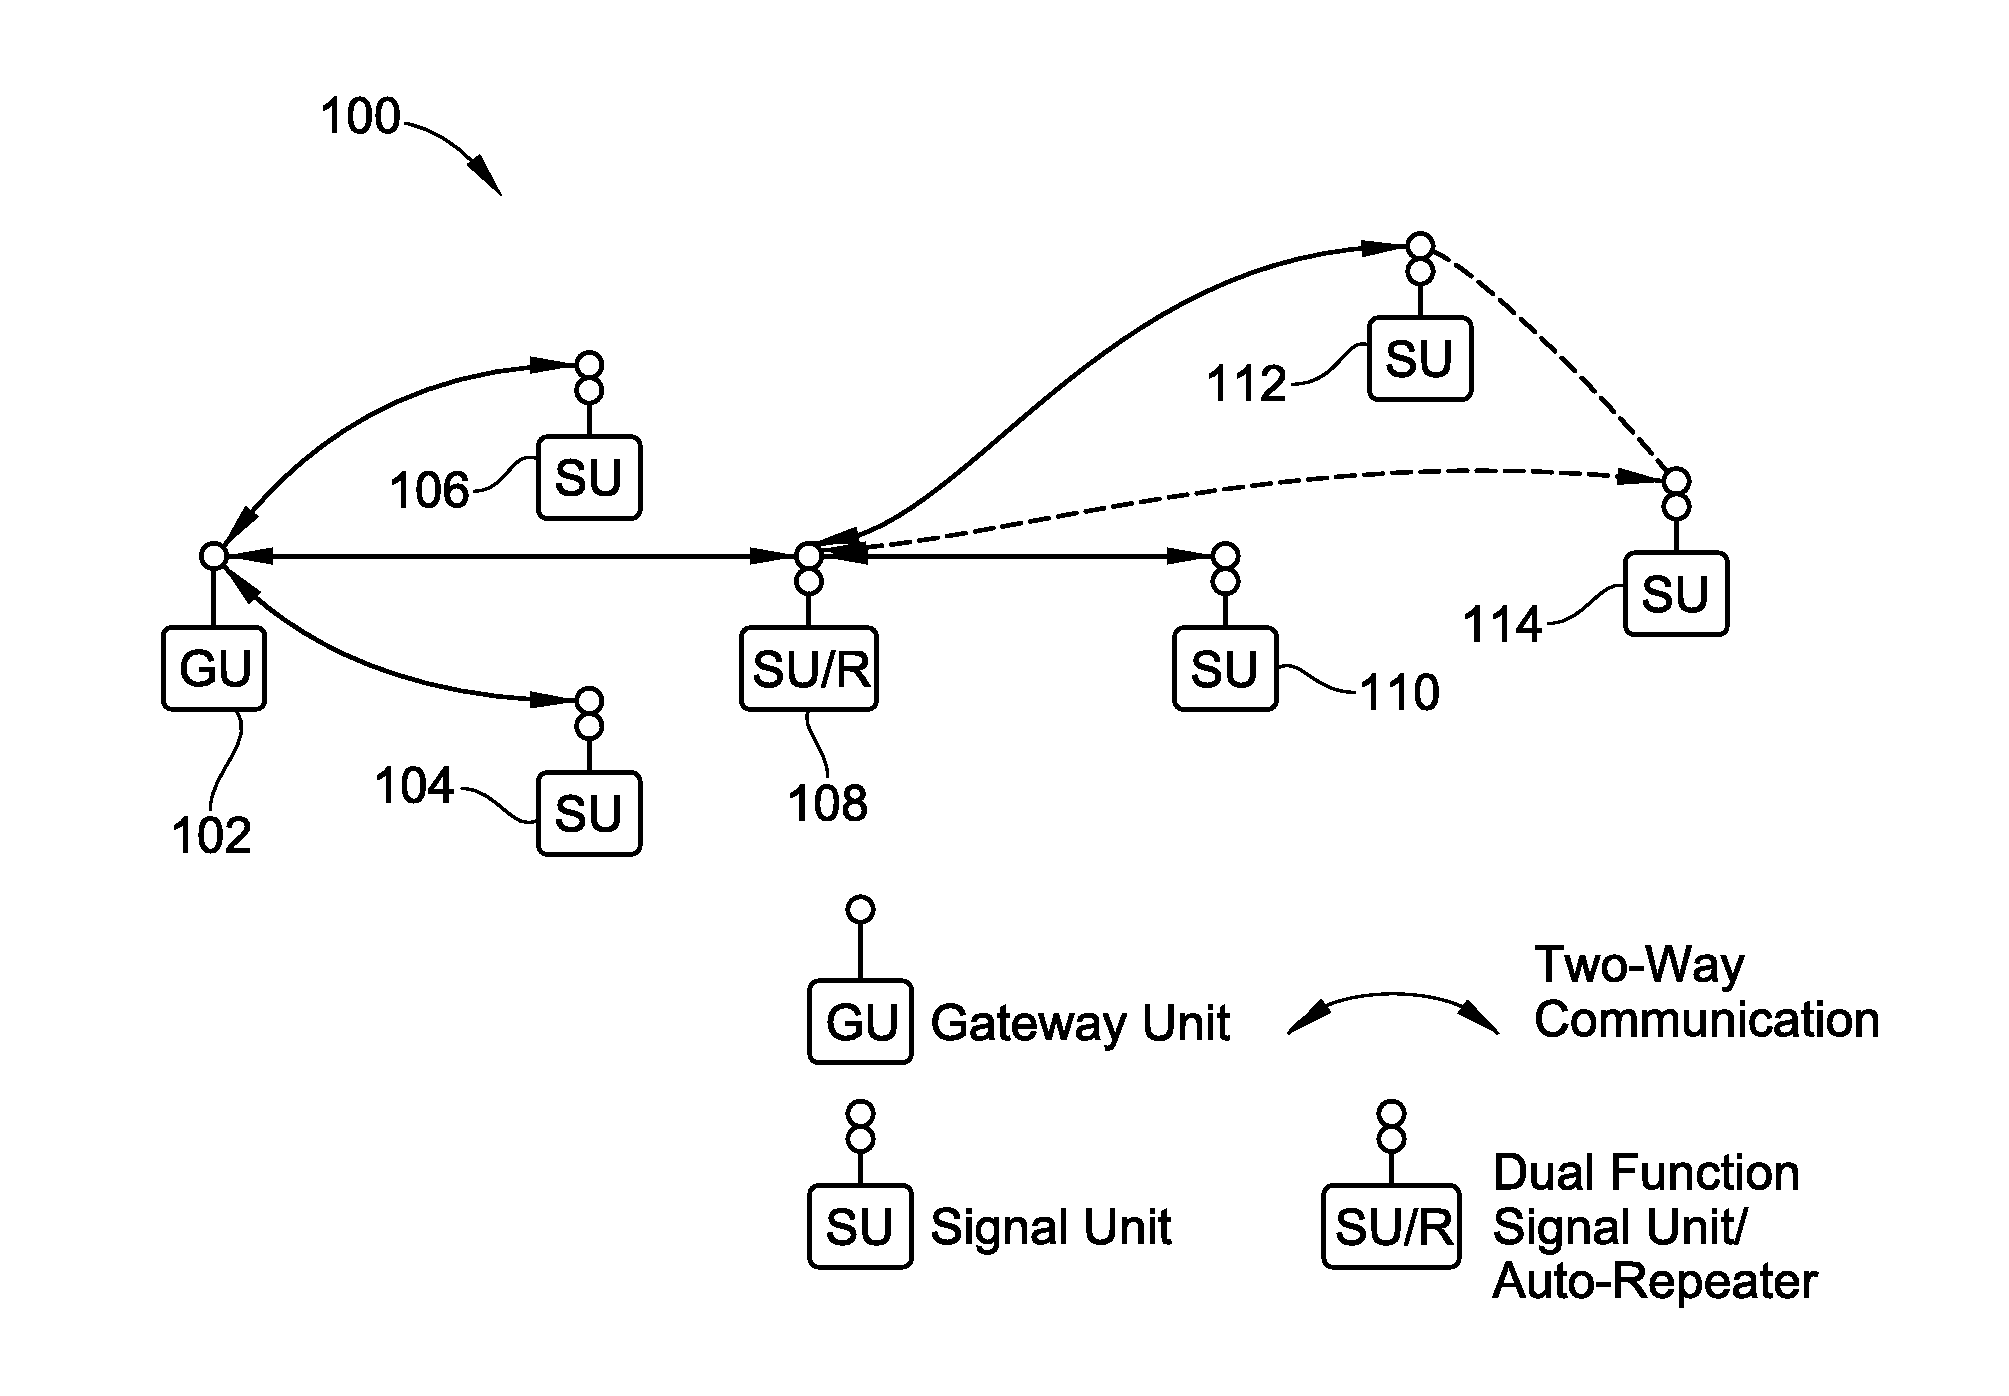 Downtime monitoring apparatus and method